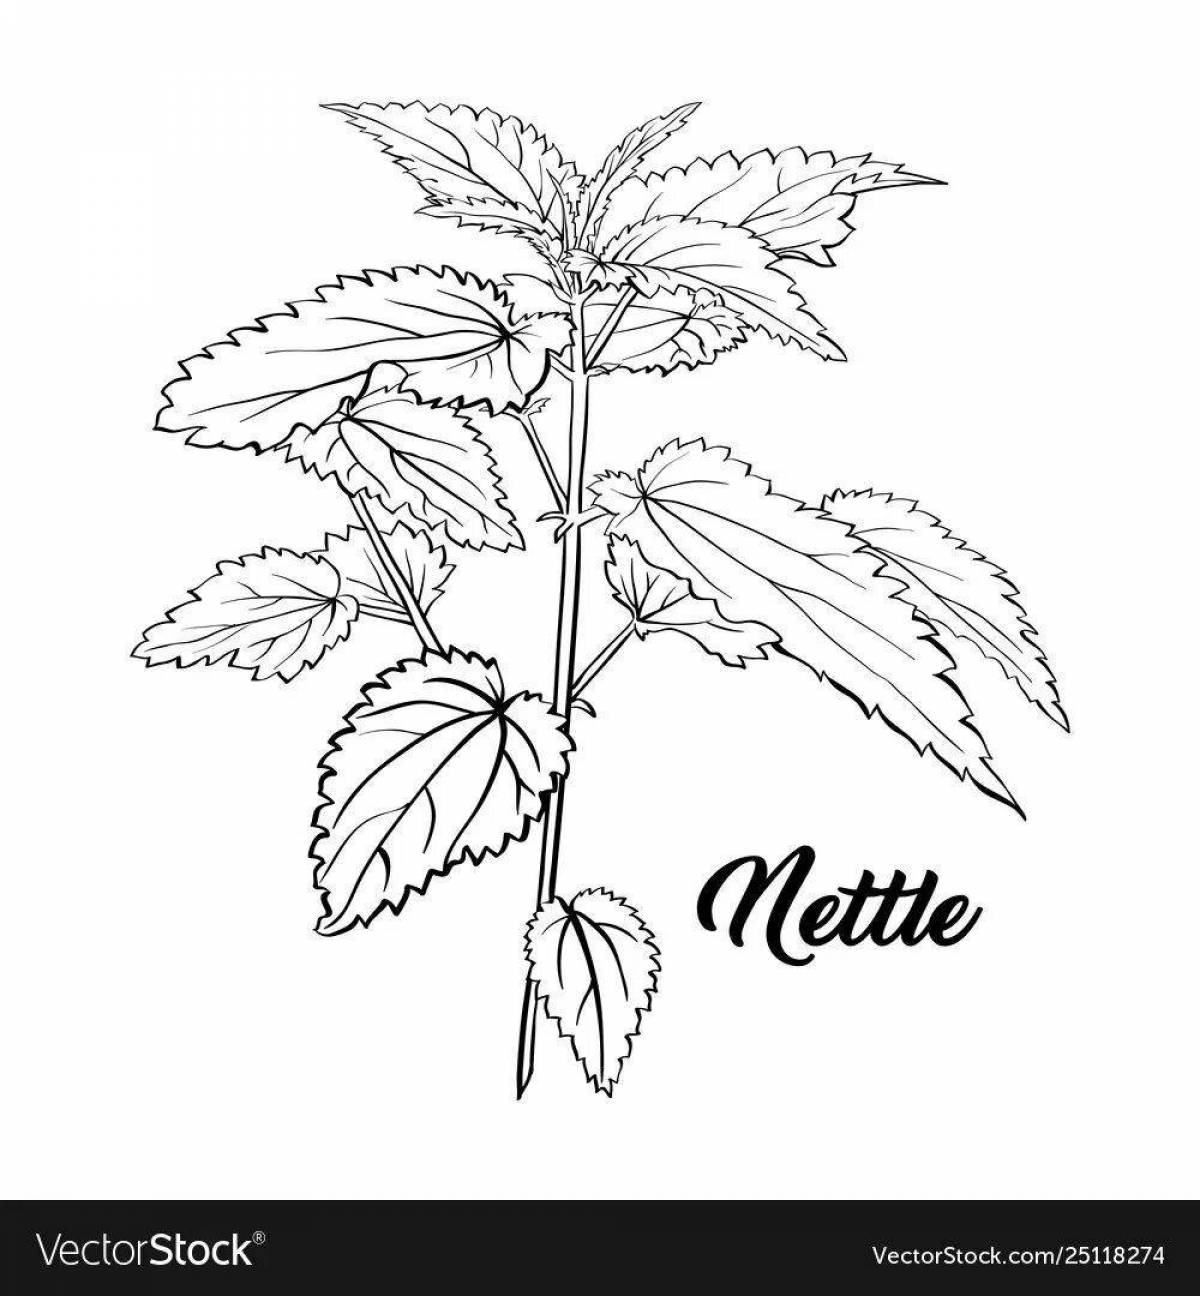 Playful nettle coloring page for toddlers